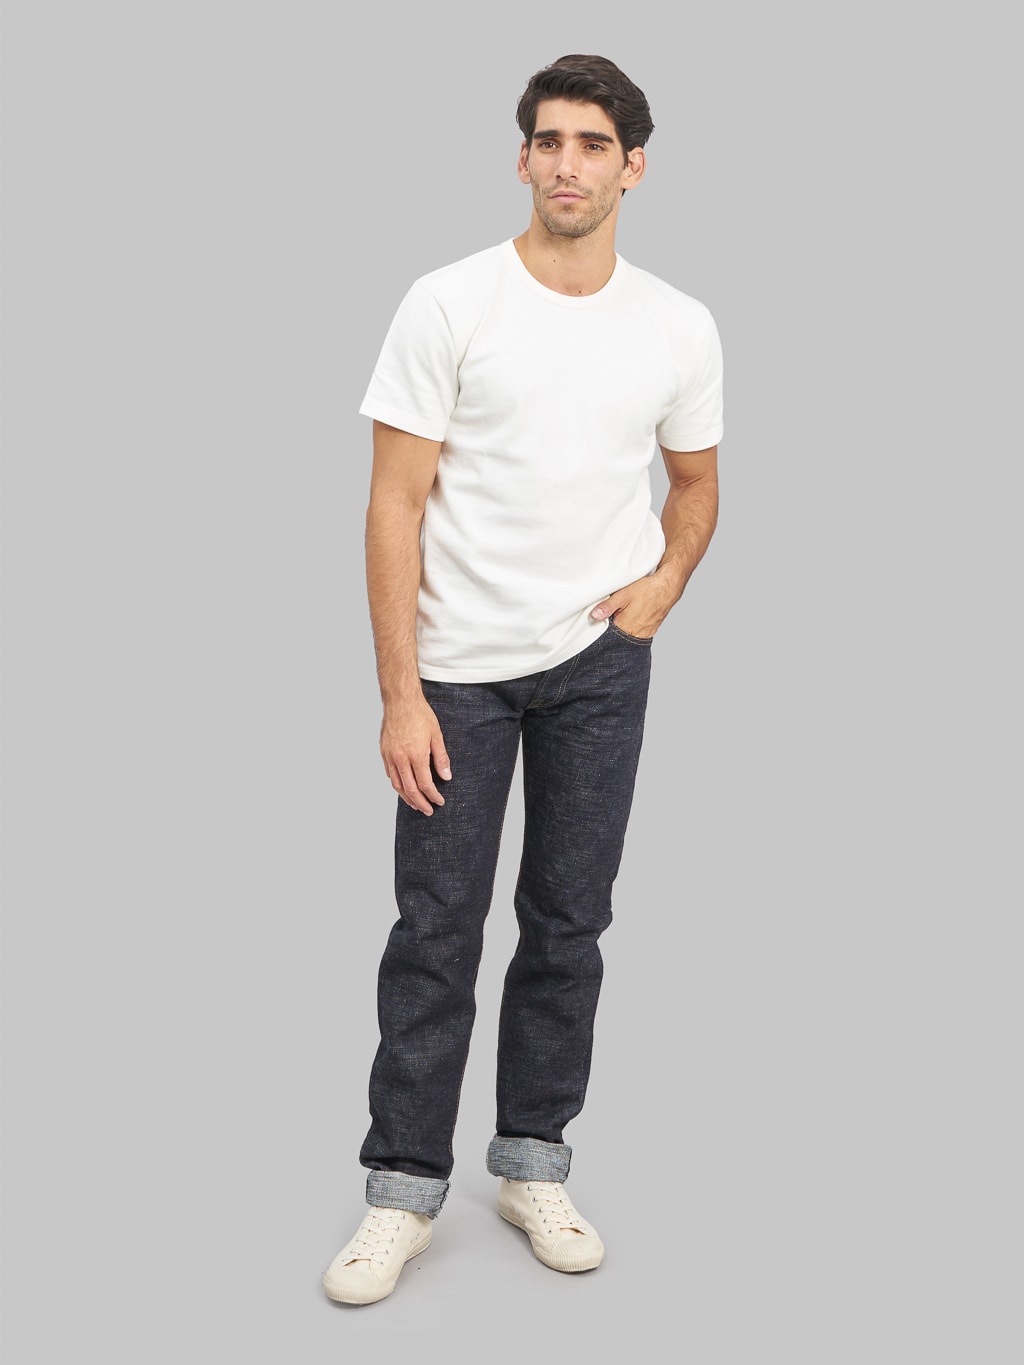 The Strike Gold 7104 Ultra Slubby Straight Tapered Jeans